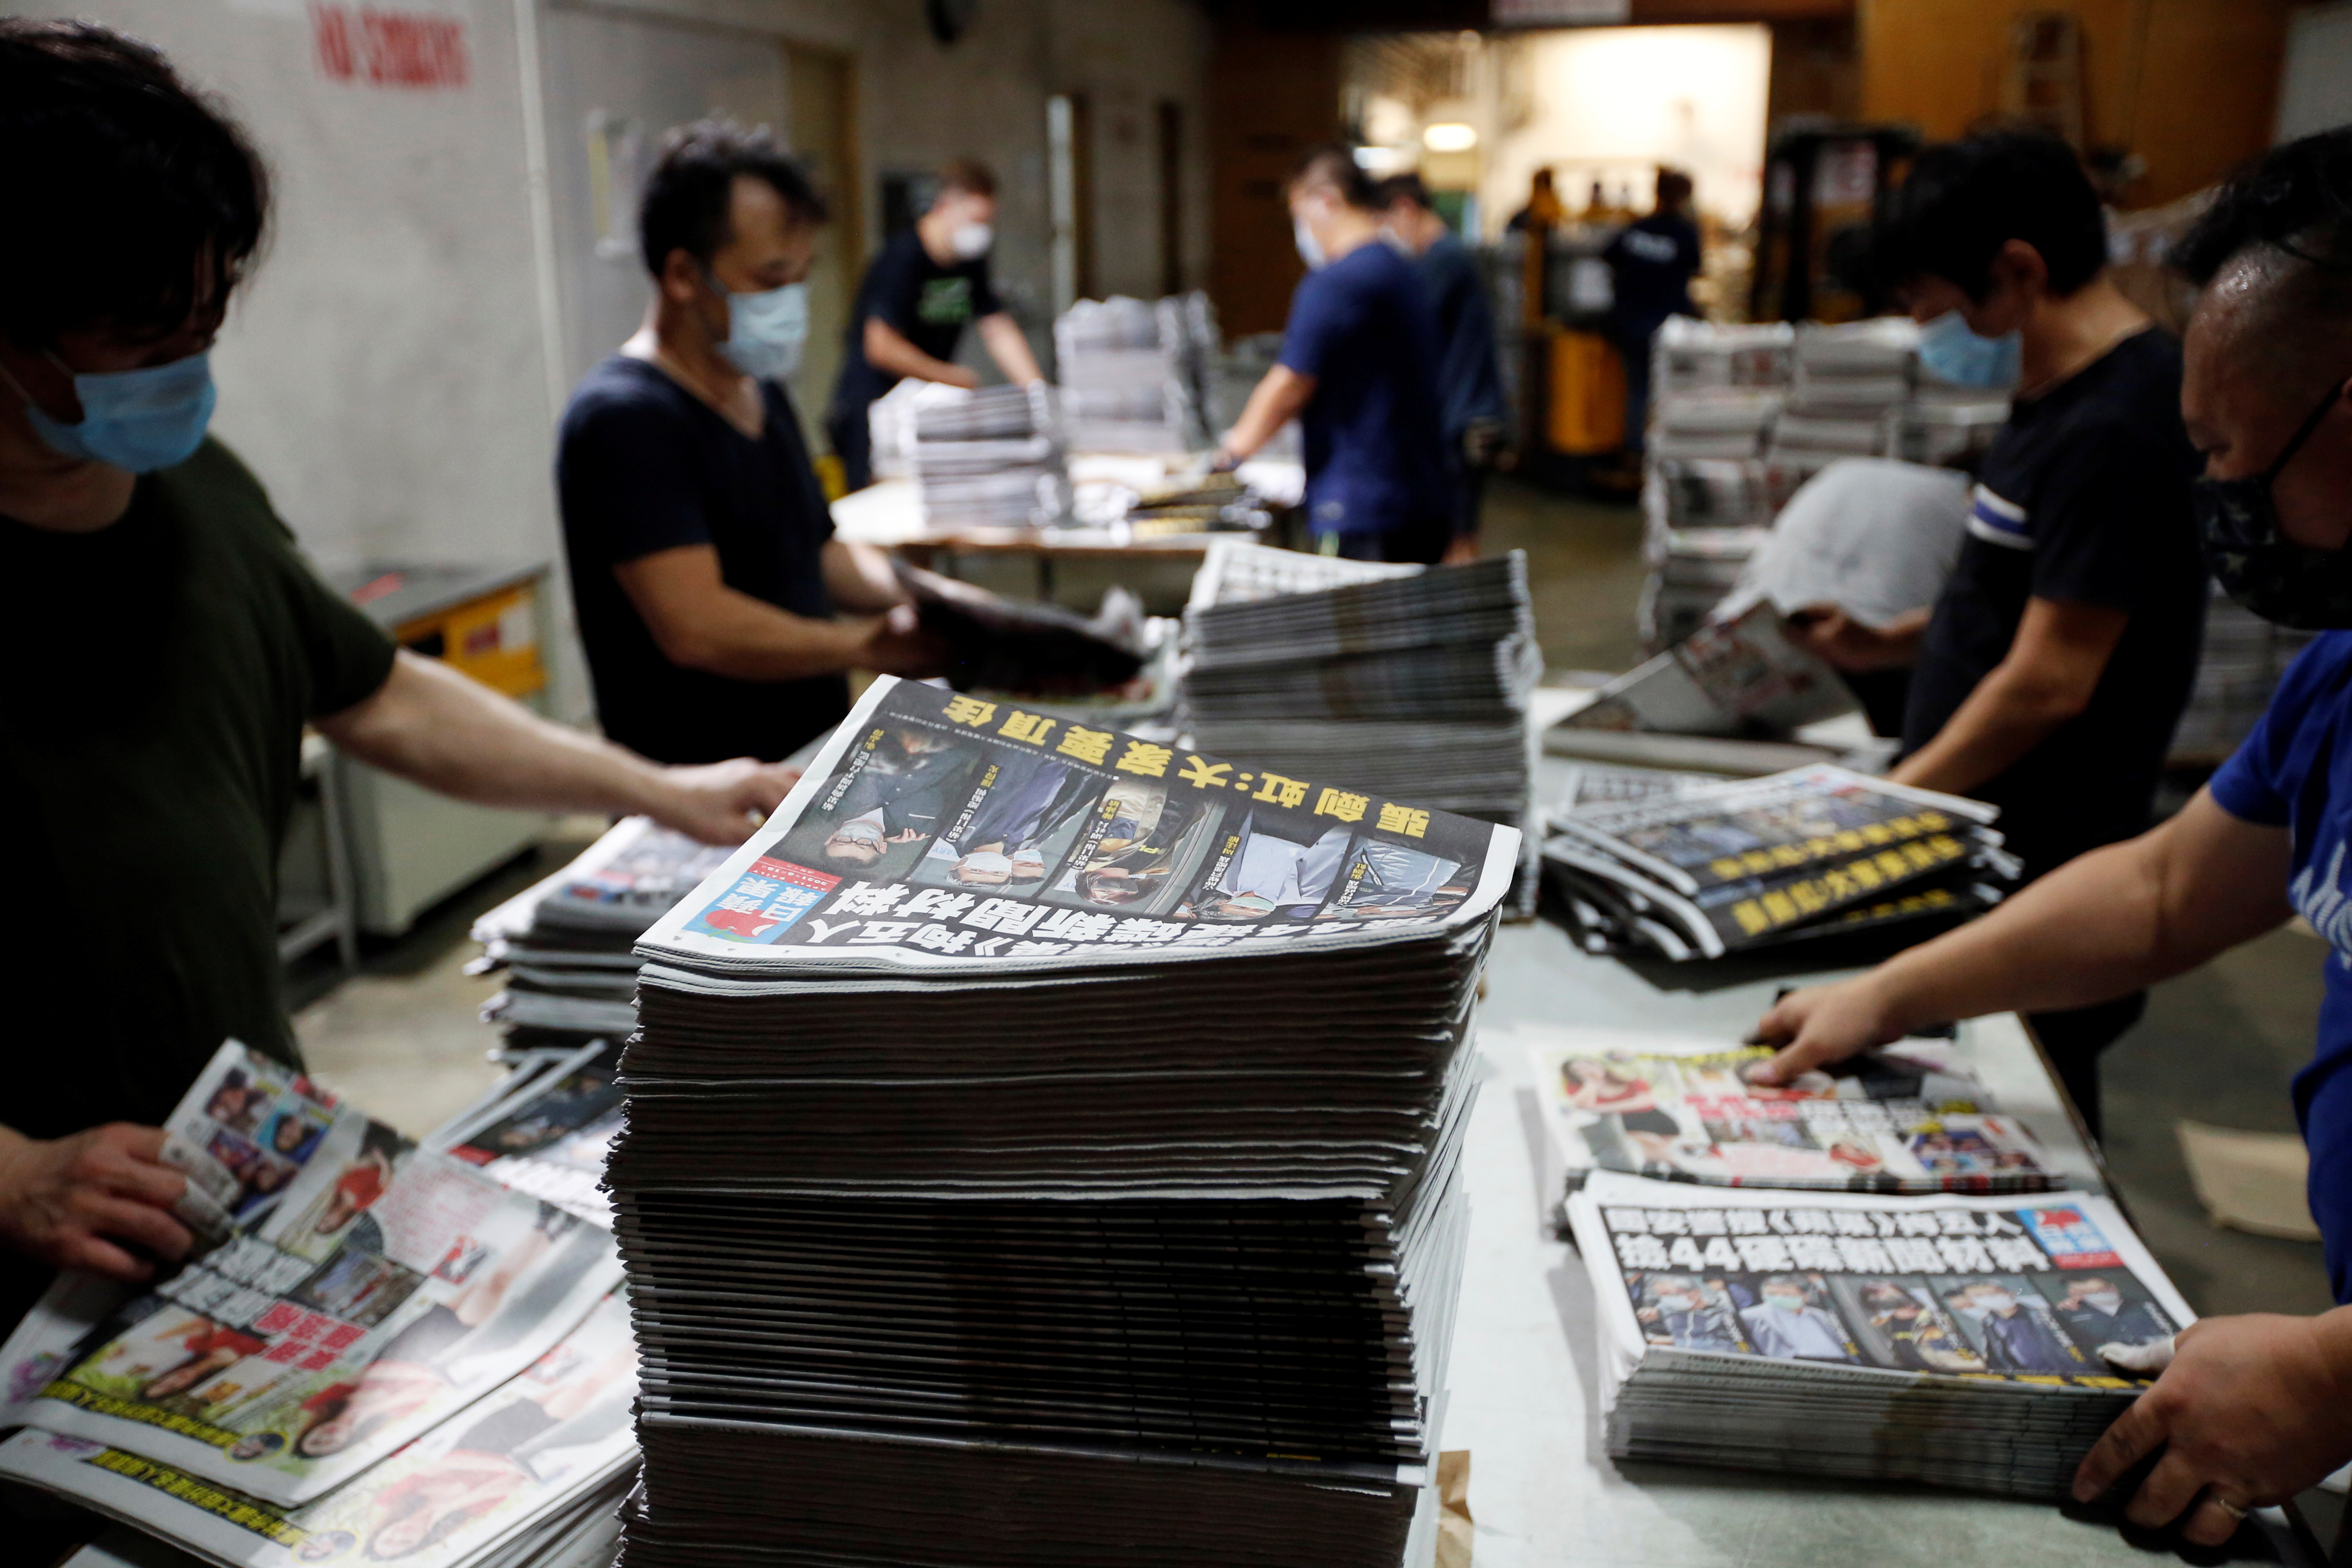 Workers prepare copies of Apple Daily newspaper at its printing facility for distribution in Hong Kong